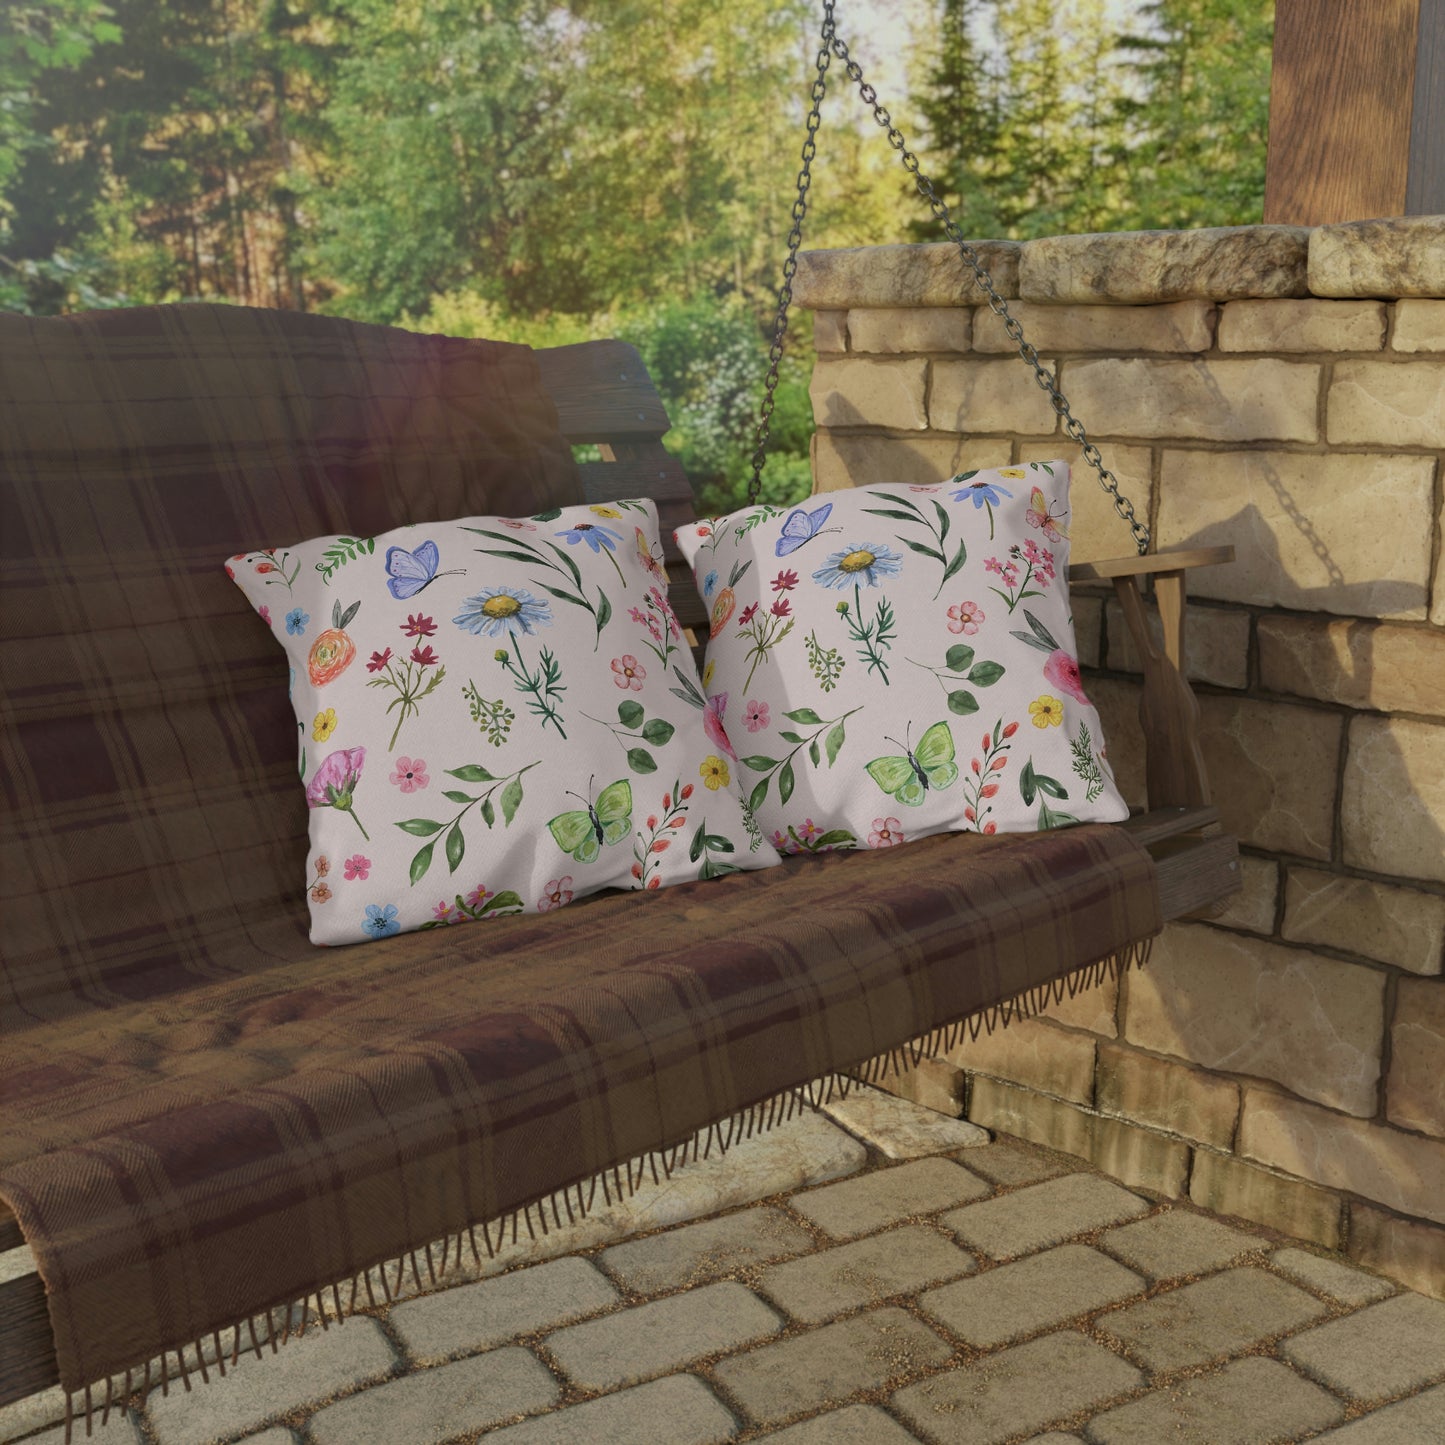 Spring Daisies and Butterflies Outdoor Pillow